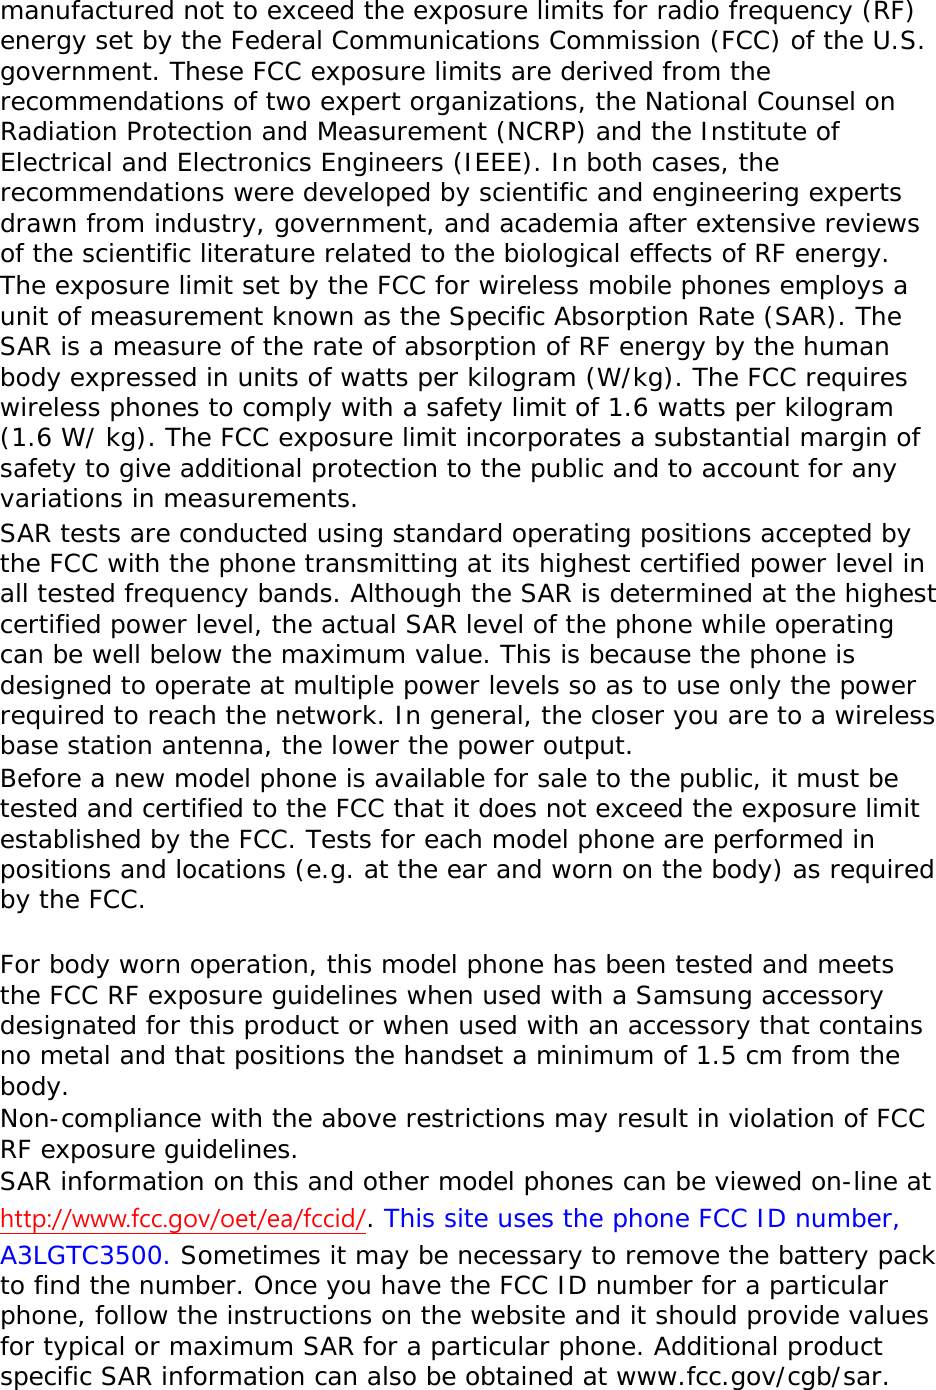 manufactured not to exceed the exposure limits for radio frequency (RF) energy set by the Federal Communications Commission (FCC) of the U.S. government. These FCC exposure limits are derived from the recommendations of two expert organizations, the National Counsel on Radiation Protection and Measurement (NCRP) and the Institute of Electrical and Electronics Engineers (IEEE). In both cases, the recommendations were developed by scientific and engineering experts drawn from industry, government, and academia after extensive reviews of the scientific literature related to the biological effects of RF energy. The exposure limit set by the FCC for wireless mobile phones employs a unit of measurement known as the Specific Absorption Rate (SAR). The SAR is a measure of the rate of absorption of RF energy by the human body expressed in units of watts per kilogram (W/kg). The FCC requires wireless phones to comply with a safety limit of 1.6 watts per kilogram (1.6 W/ kg). The FCC exposure limit incorporates a substantial margin of safety to give additional protection to the public and to account for any variations in measurements. SAR tests are conducted using standard operating positions accepted by the FCC with the phone transmitting at its highest certified power level in all tested frequency bands. Although the SAR is determined at the highest certified power level, the actual SAR level of the phone while operating can be well below the maximum value. This is because the phone is designed to operate at multiple power levels so as to use only the power required to reach the network. In general, the closer you are to a wireless base station antenna, the lower the power output. Before a new model phone is available for sale to the public, it must be tested and certified to the FCC that it does not exceed the exposure limit established by the FCC. Tests for each model phone are performed in positions and locations (e.g. at the ear and worn on the body) as required by the FCC.    For body worn operation, this model phone has been tested and meets the FCC RF exposure guidelines when used with a Samsung accessory designated for this product or when used with an accessory that contains no metal and that positions the handset a minimum of 1.5 cm from the body.  Non-compliance with the above restrictions may result in violation of FCC RF exposure guidelines. SAR information on this and other model phones can be viewed on-line at http://www.fcc.gov/oet/ea/fccid/. This site uses the phone FCC ID number, A3LGTC3500. Sometimes it may be necessary to remove the battery pack to find the number. Once you have the FCC ID number for a particular phone, follow the instructions on the website and it should provide values for typical or maximum SAR for a particular phone. Additional product specific SAR information can also be obtained at www.fcc.gov/cgb/sar. 